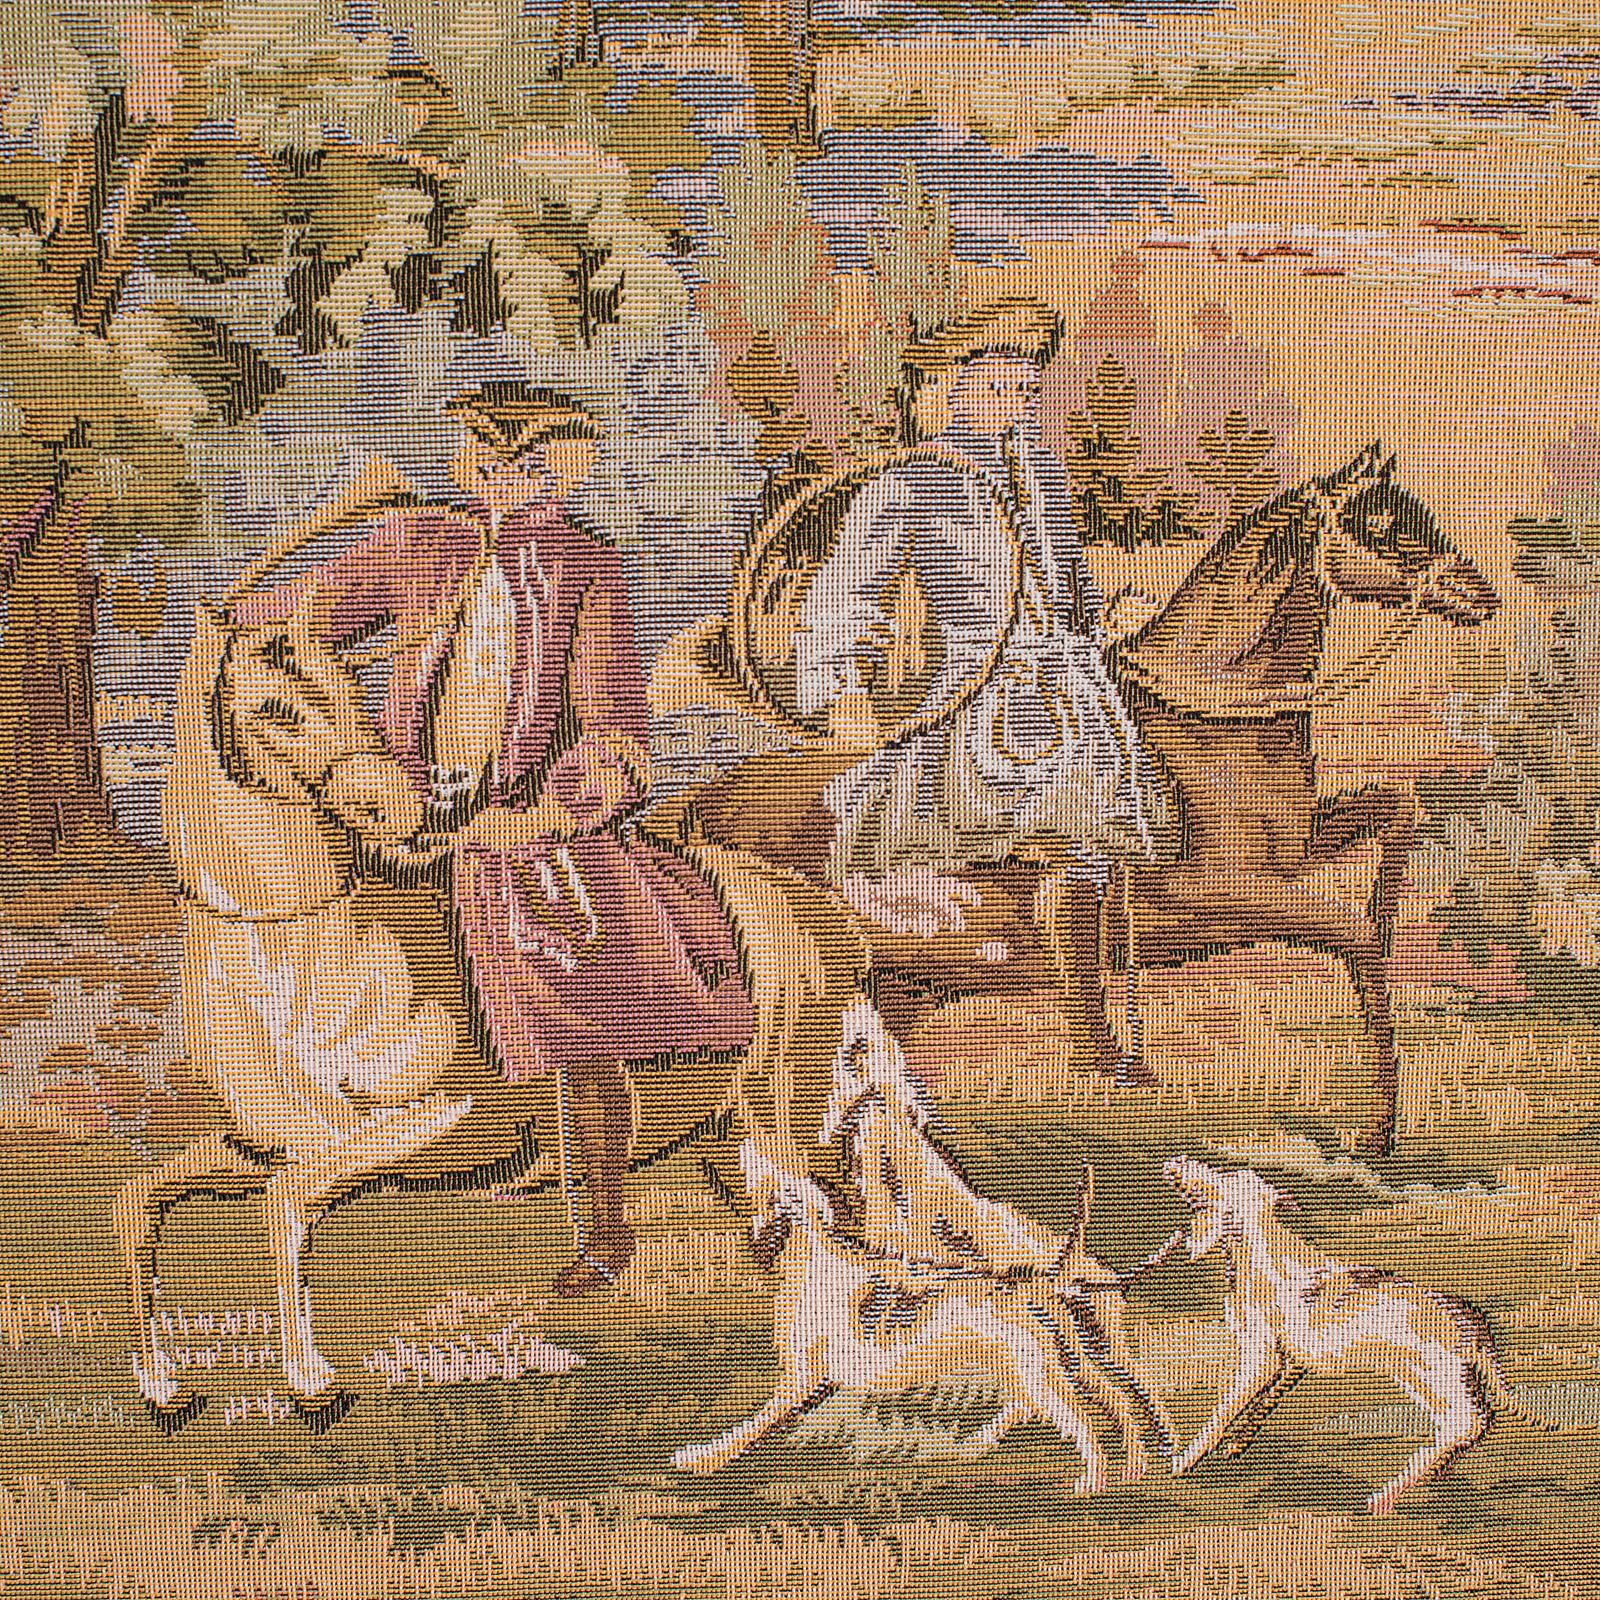 20th Century Large Antique Panoramic Tapestry, French, Needlepoint, Decorative Panel, c.1910